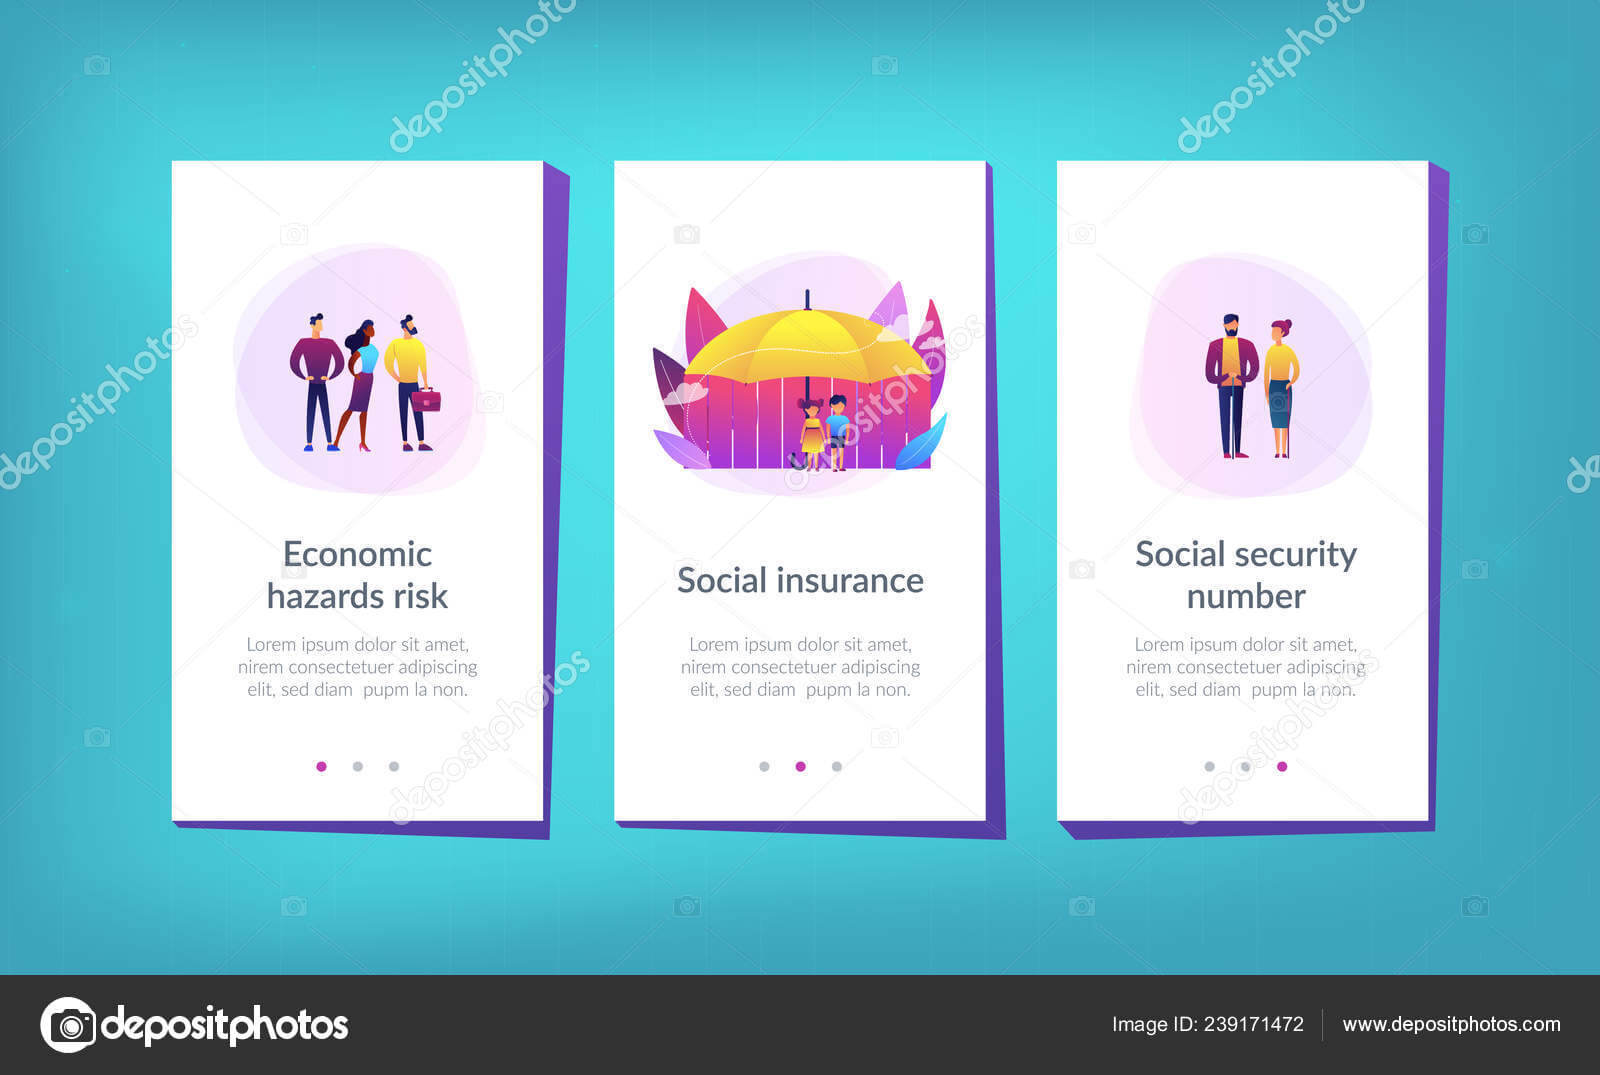 Blank Social Security Card Template | Social Insurance App In Blank Social Security Card Template Download